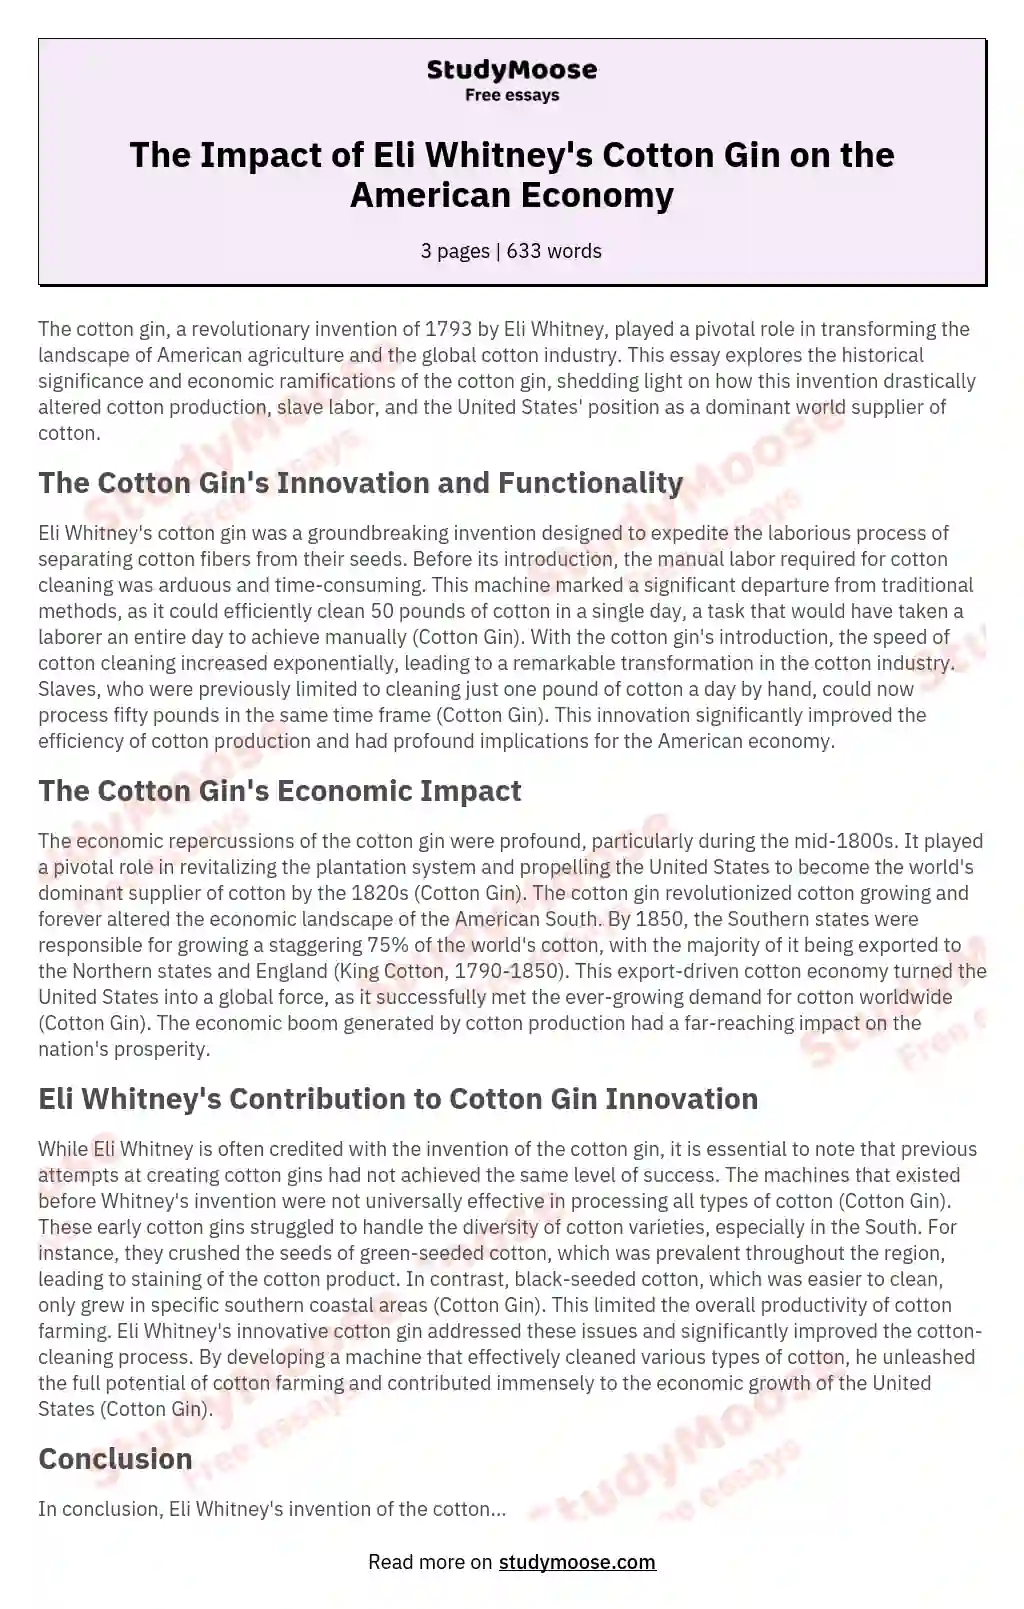 The Impact of Eli Whitney's Cotton Gin on the American Economy essay